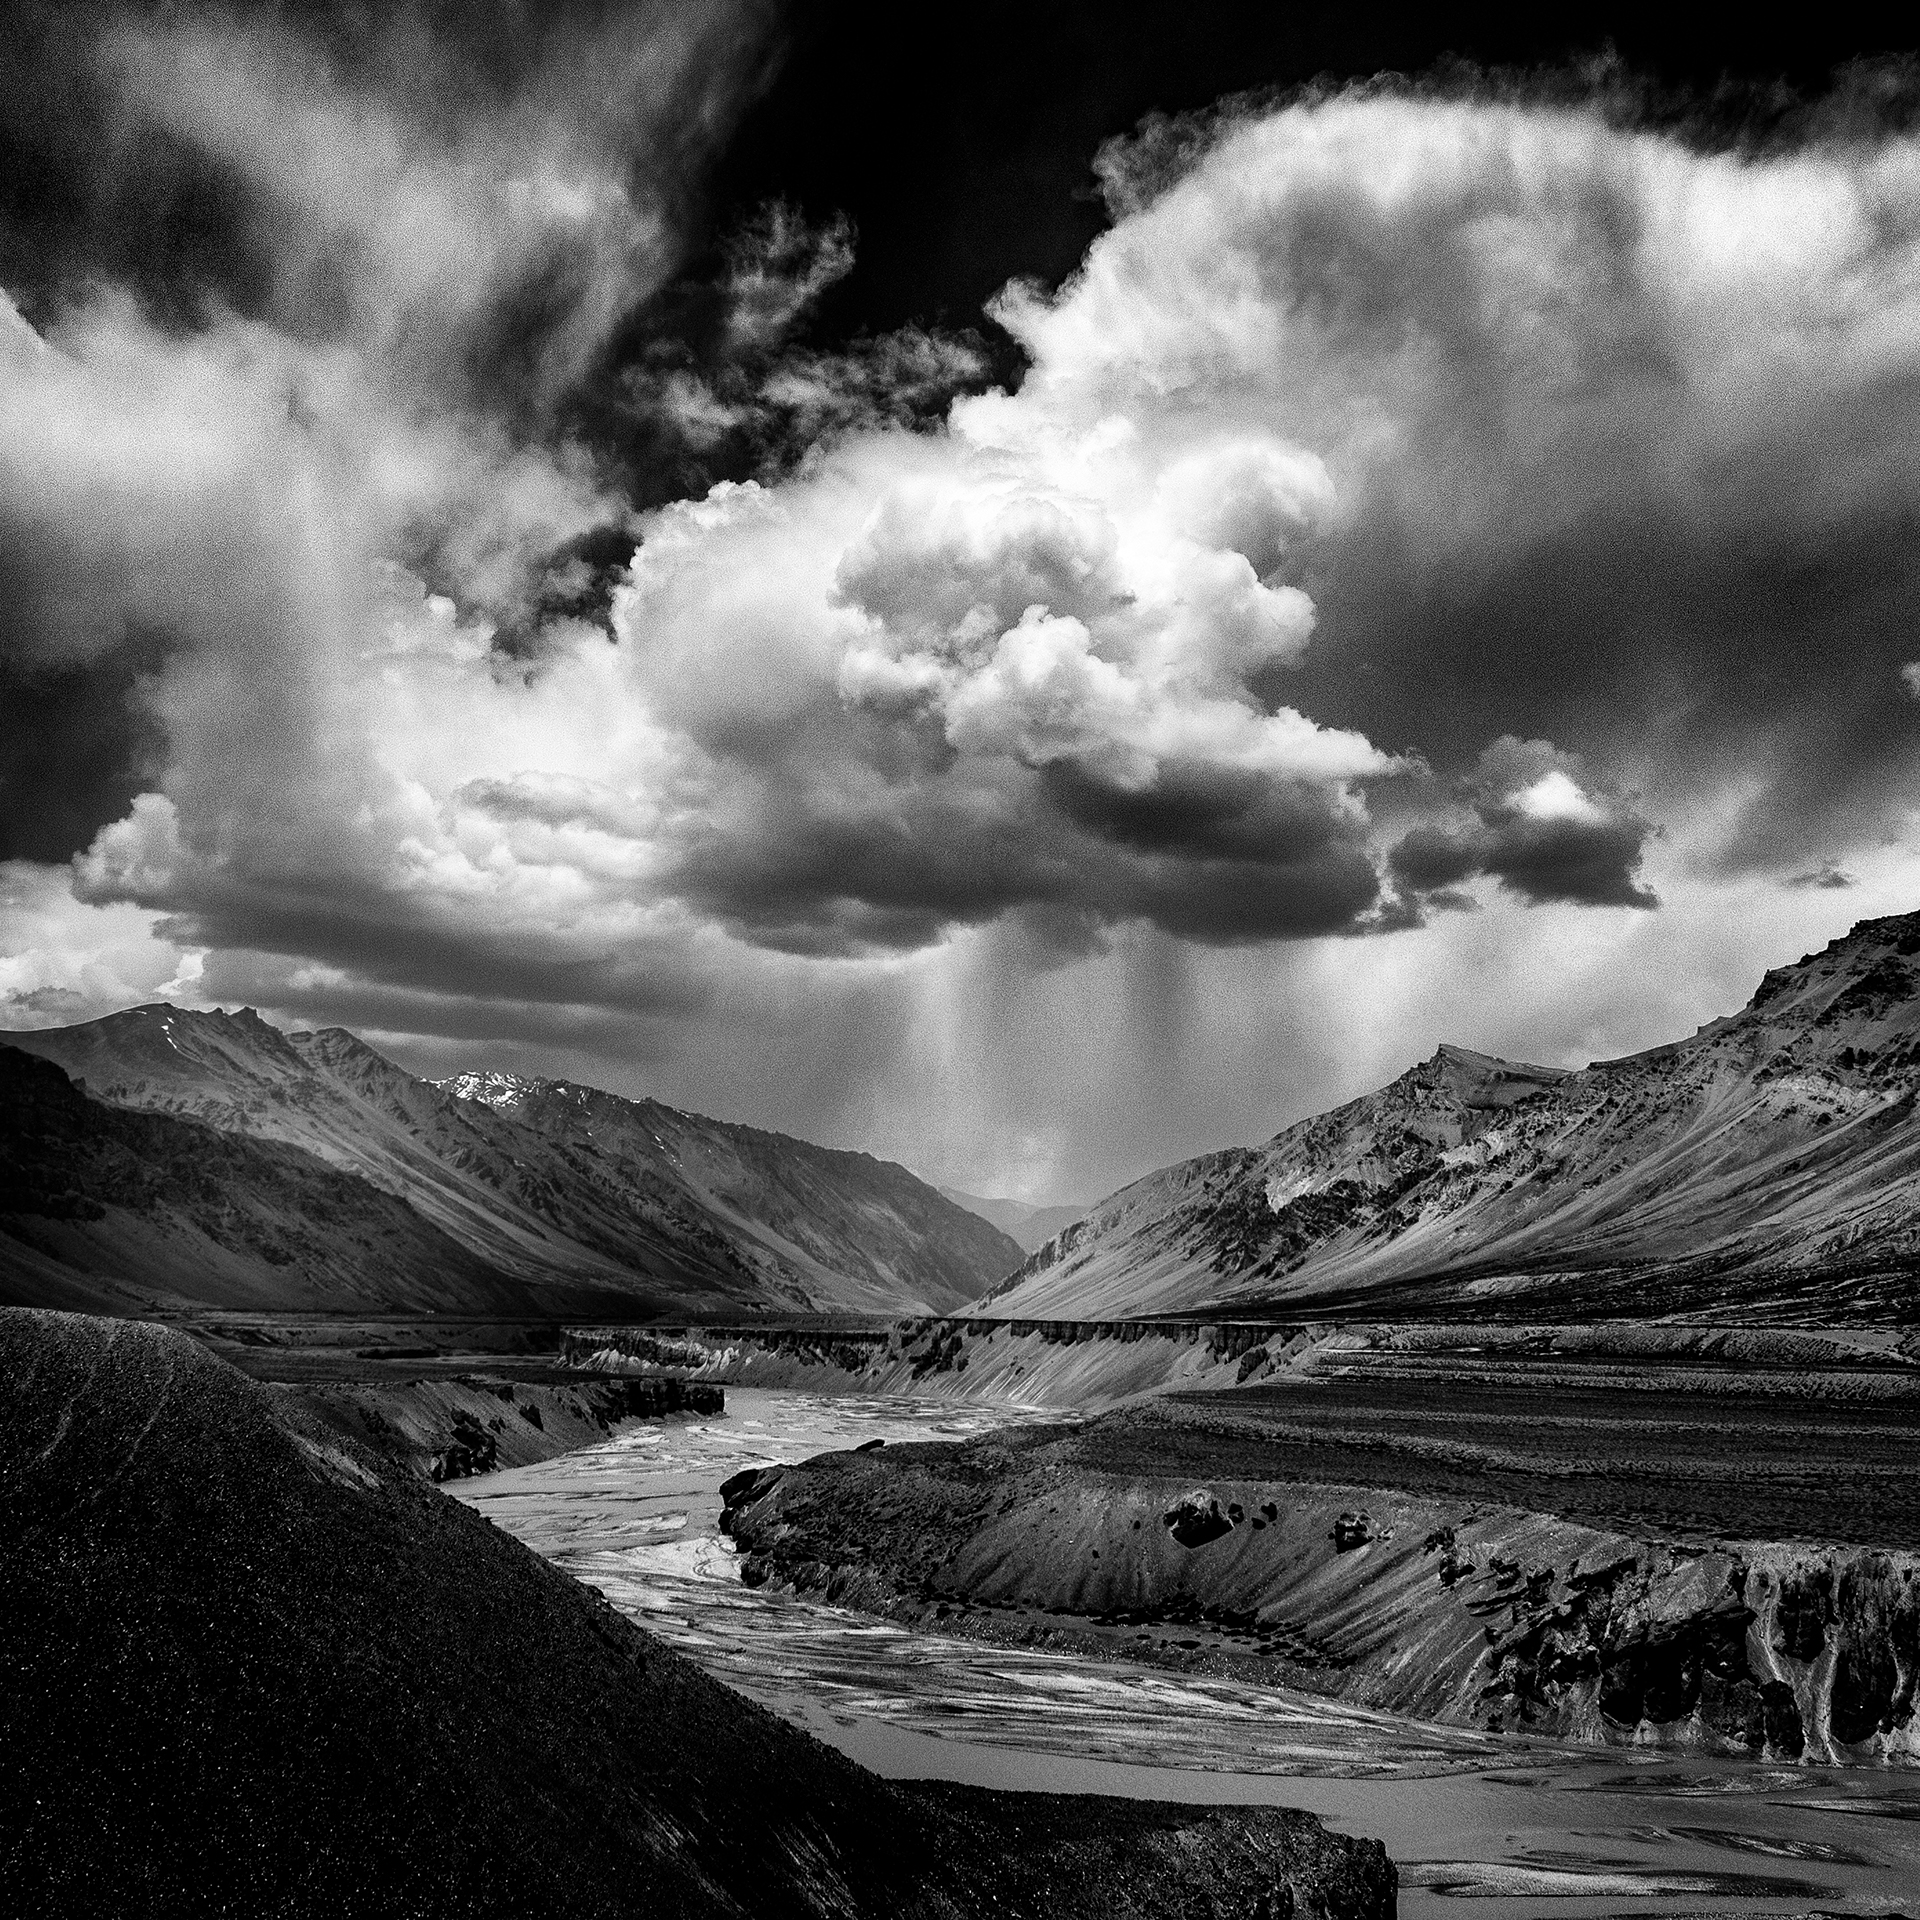 Jayanta Roy's Himalayan Odyssey Is a Hypnotic Black and White Landscape